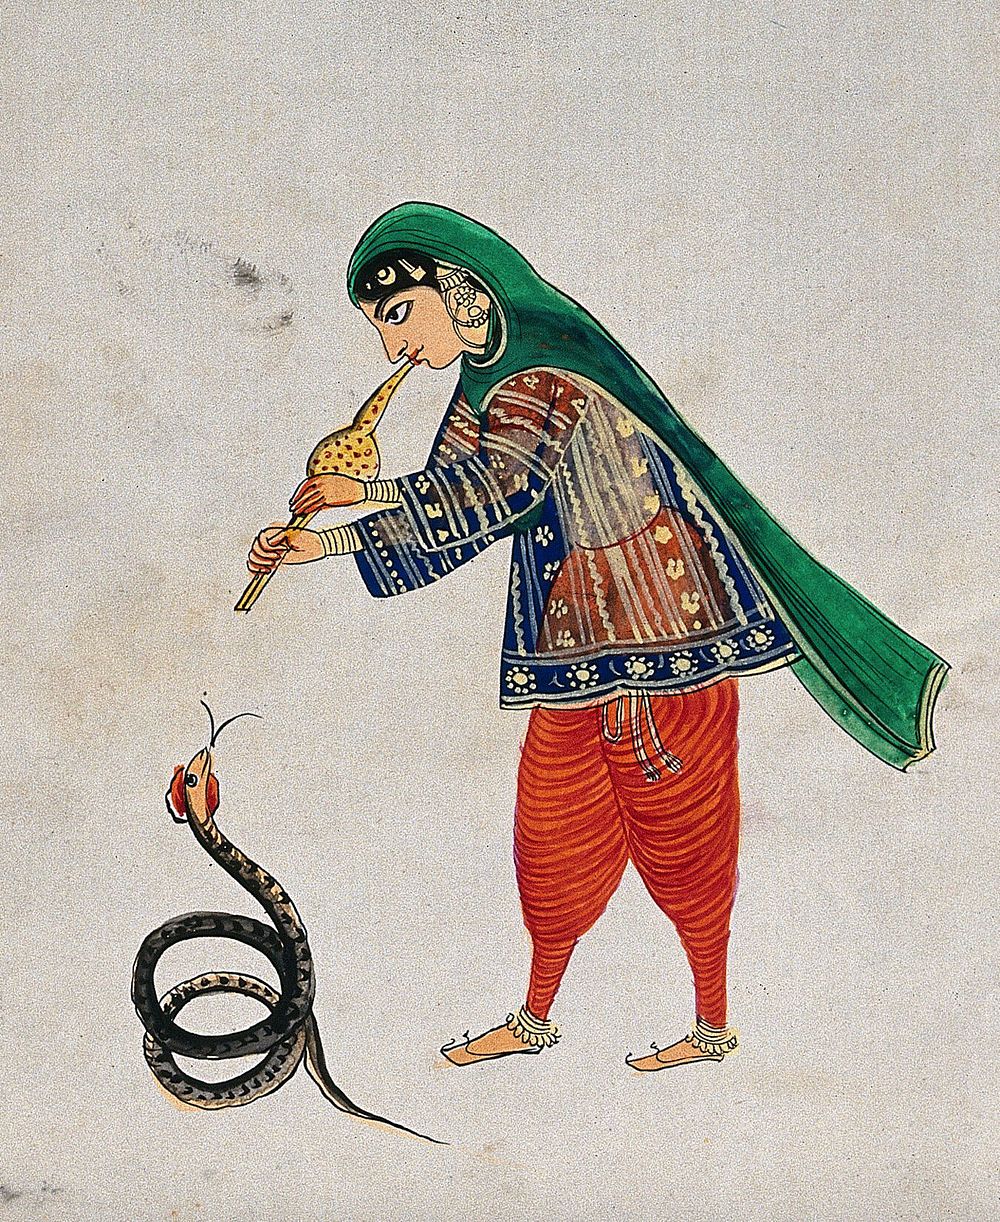 A female snake charmer plays the flute to rouse the snake. Gouache painting by an Indian artist.